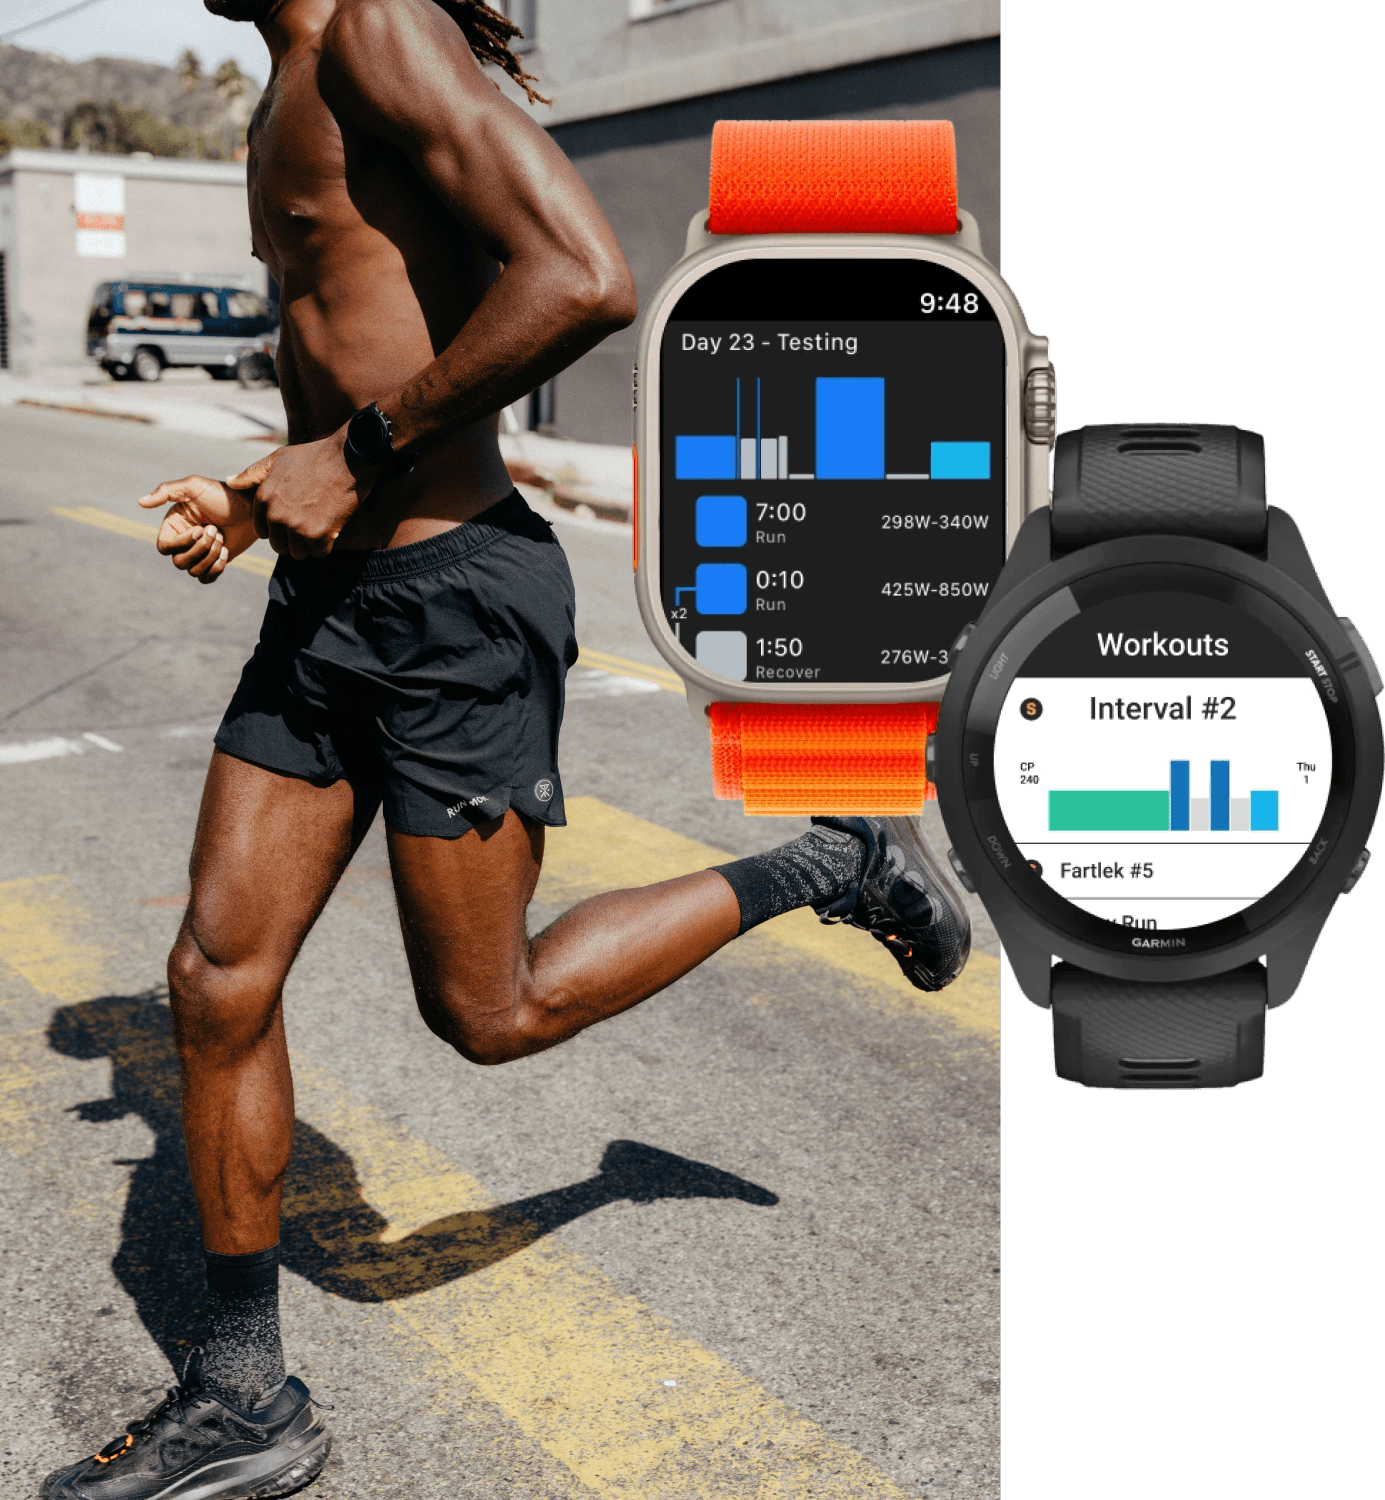 Watch: Guided workouts on your watch